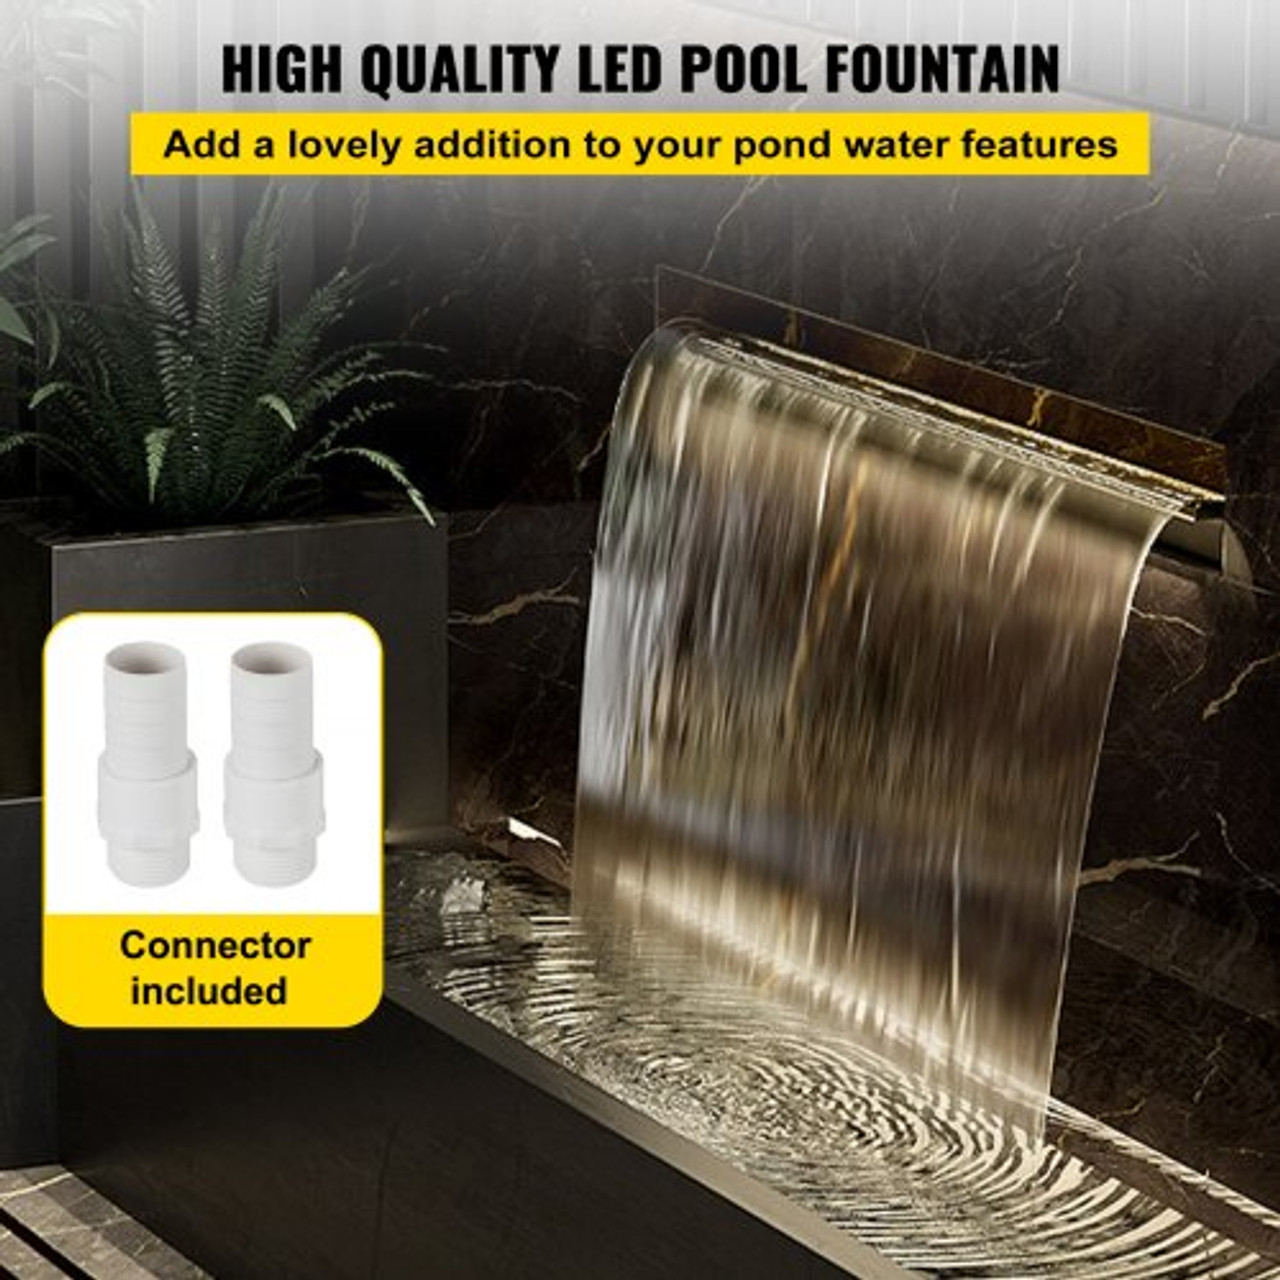 Pool Fountain Stainless Steel Pool Waterfall 59.4" x 4.5" x 3.1"(W x D x H) with LED Strip Light Waterfall Spillway Rectangular Garden Outdoor